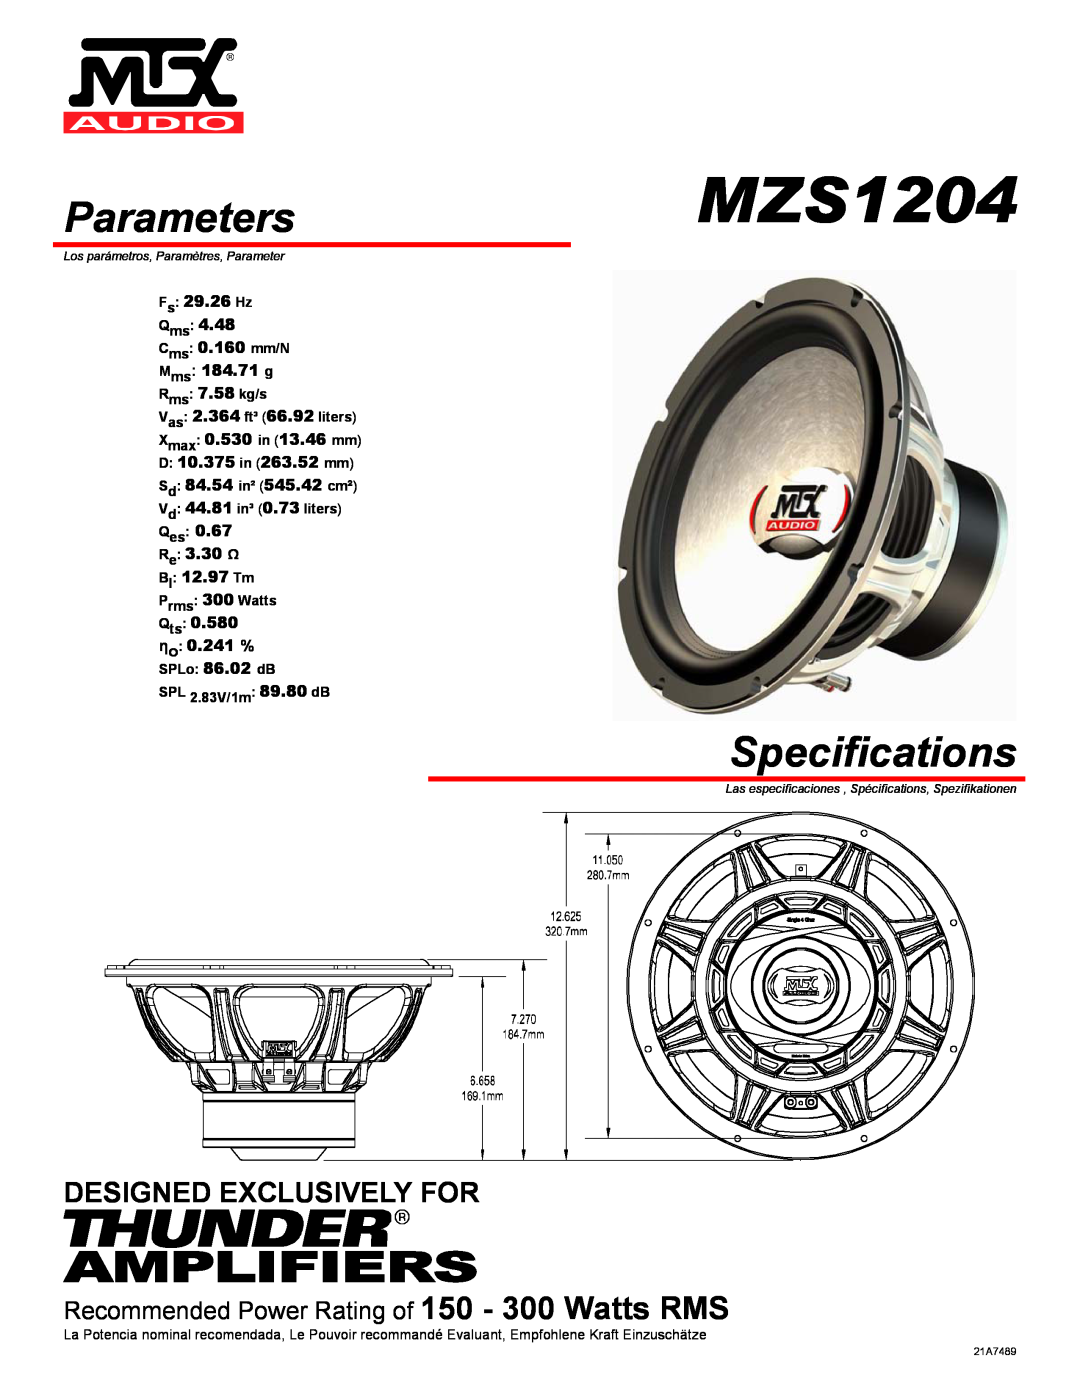 MTX Audio MZS1204 specifications Parameters, Specifications, Amplifiers, Designed Exclusively For, Fs 29.26 Hz Qms 